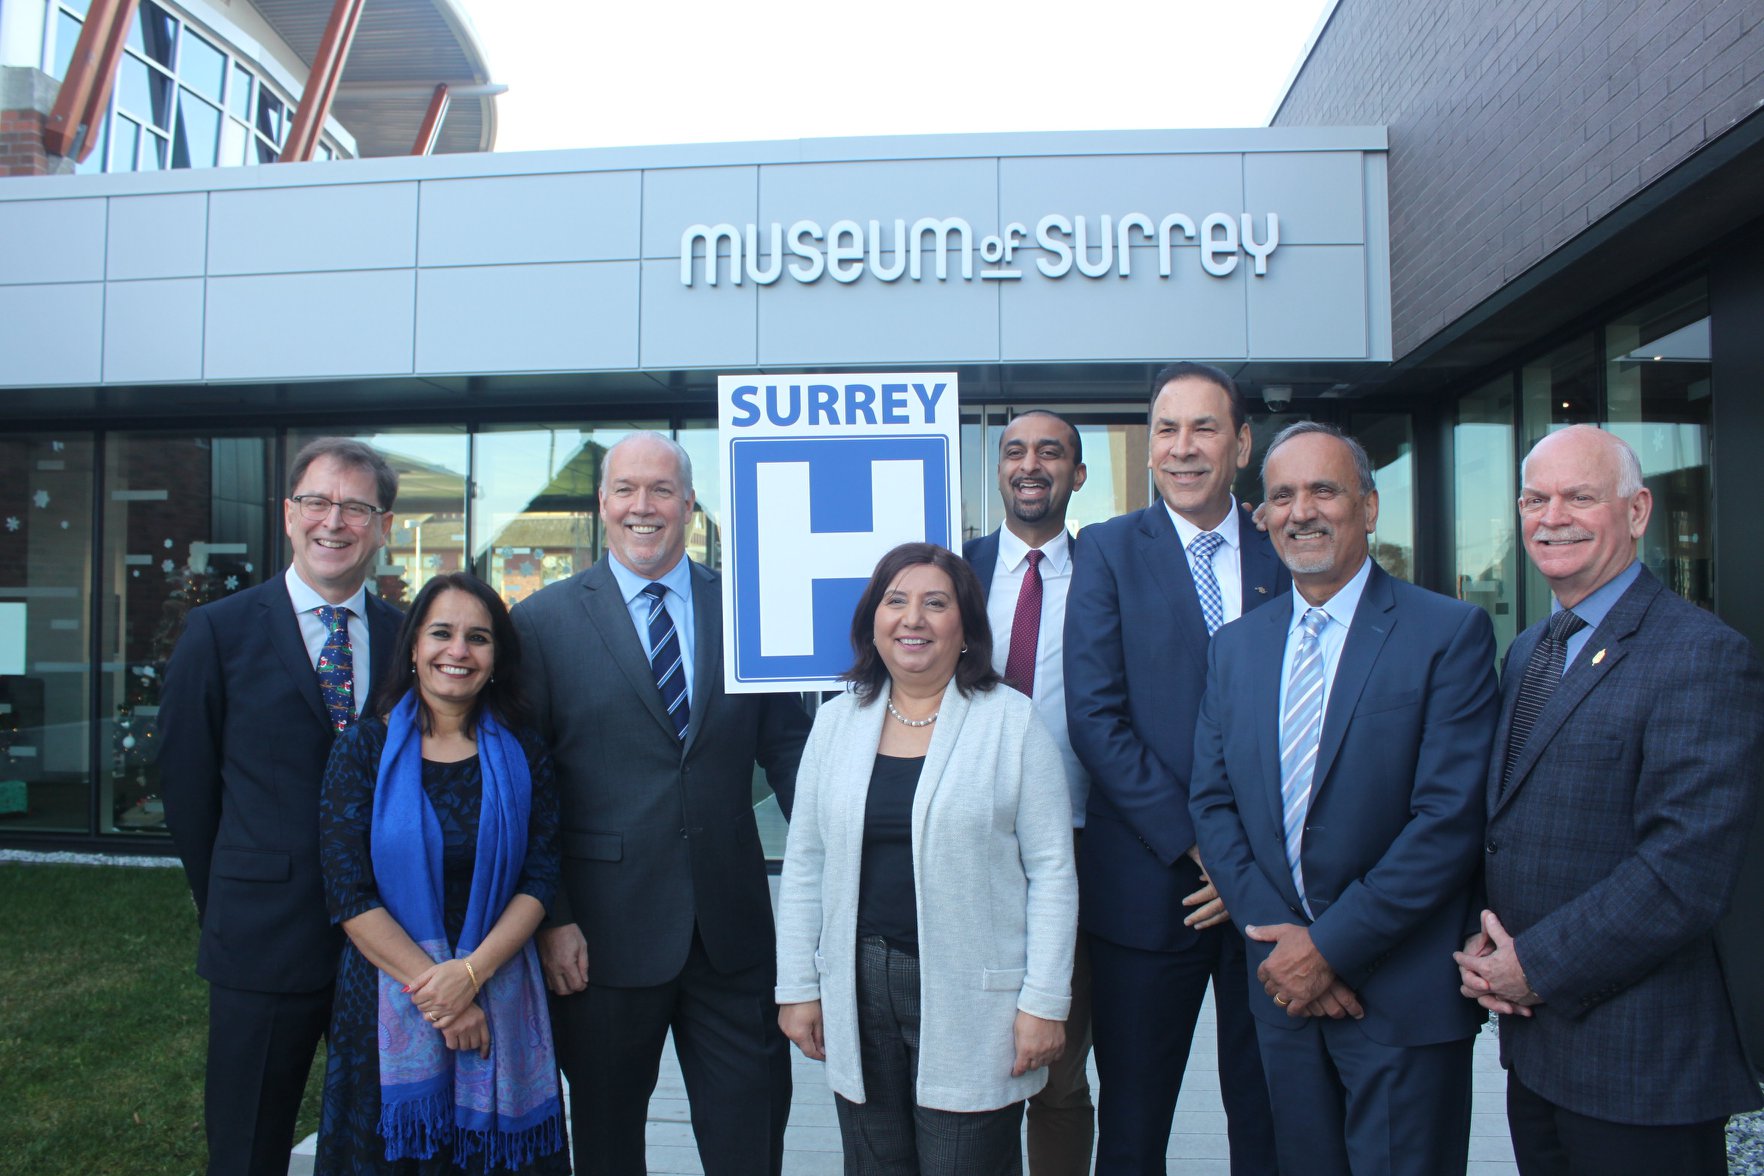 Group photo of Minister Dix and Premier Horgan, joined by Surrey MLAs at Museum of Surrey. 